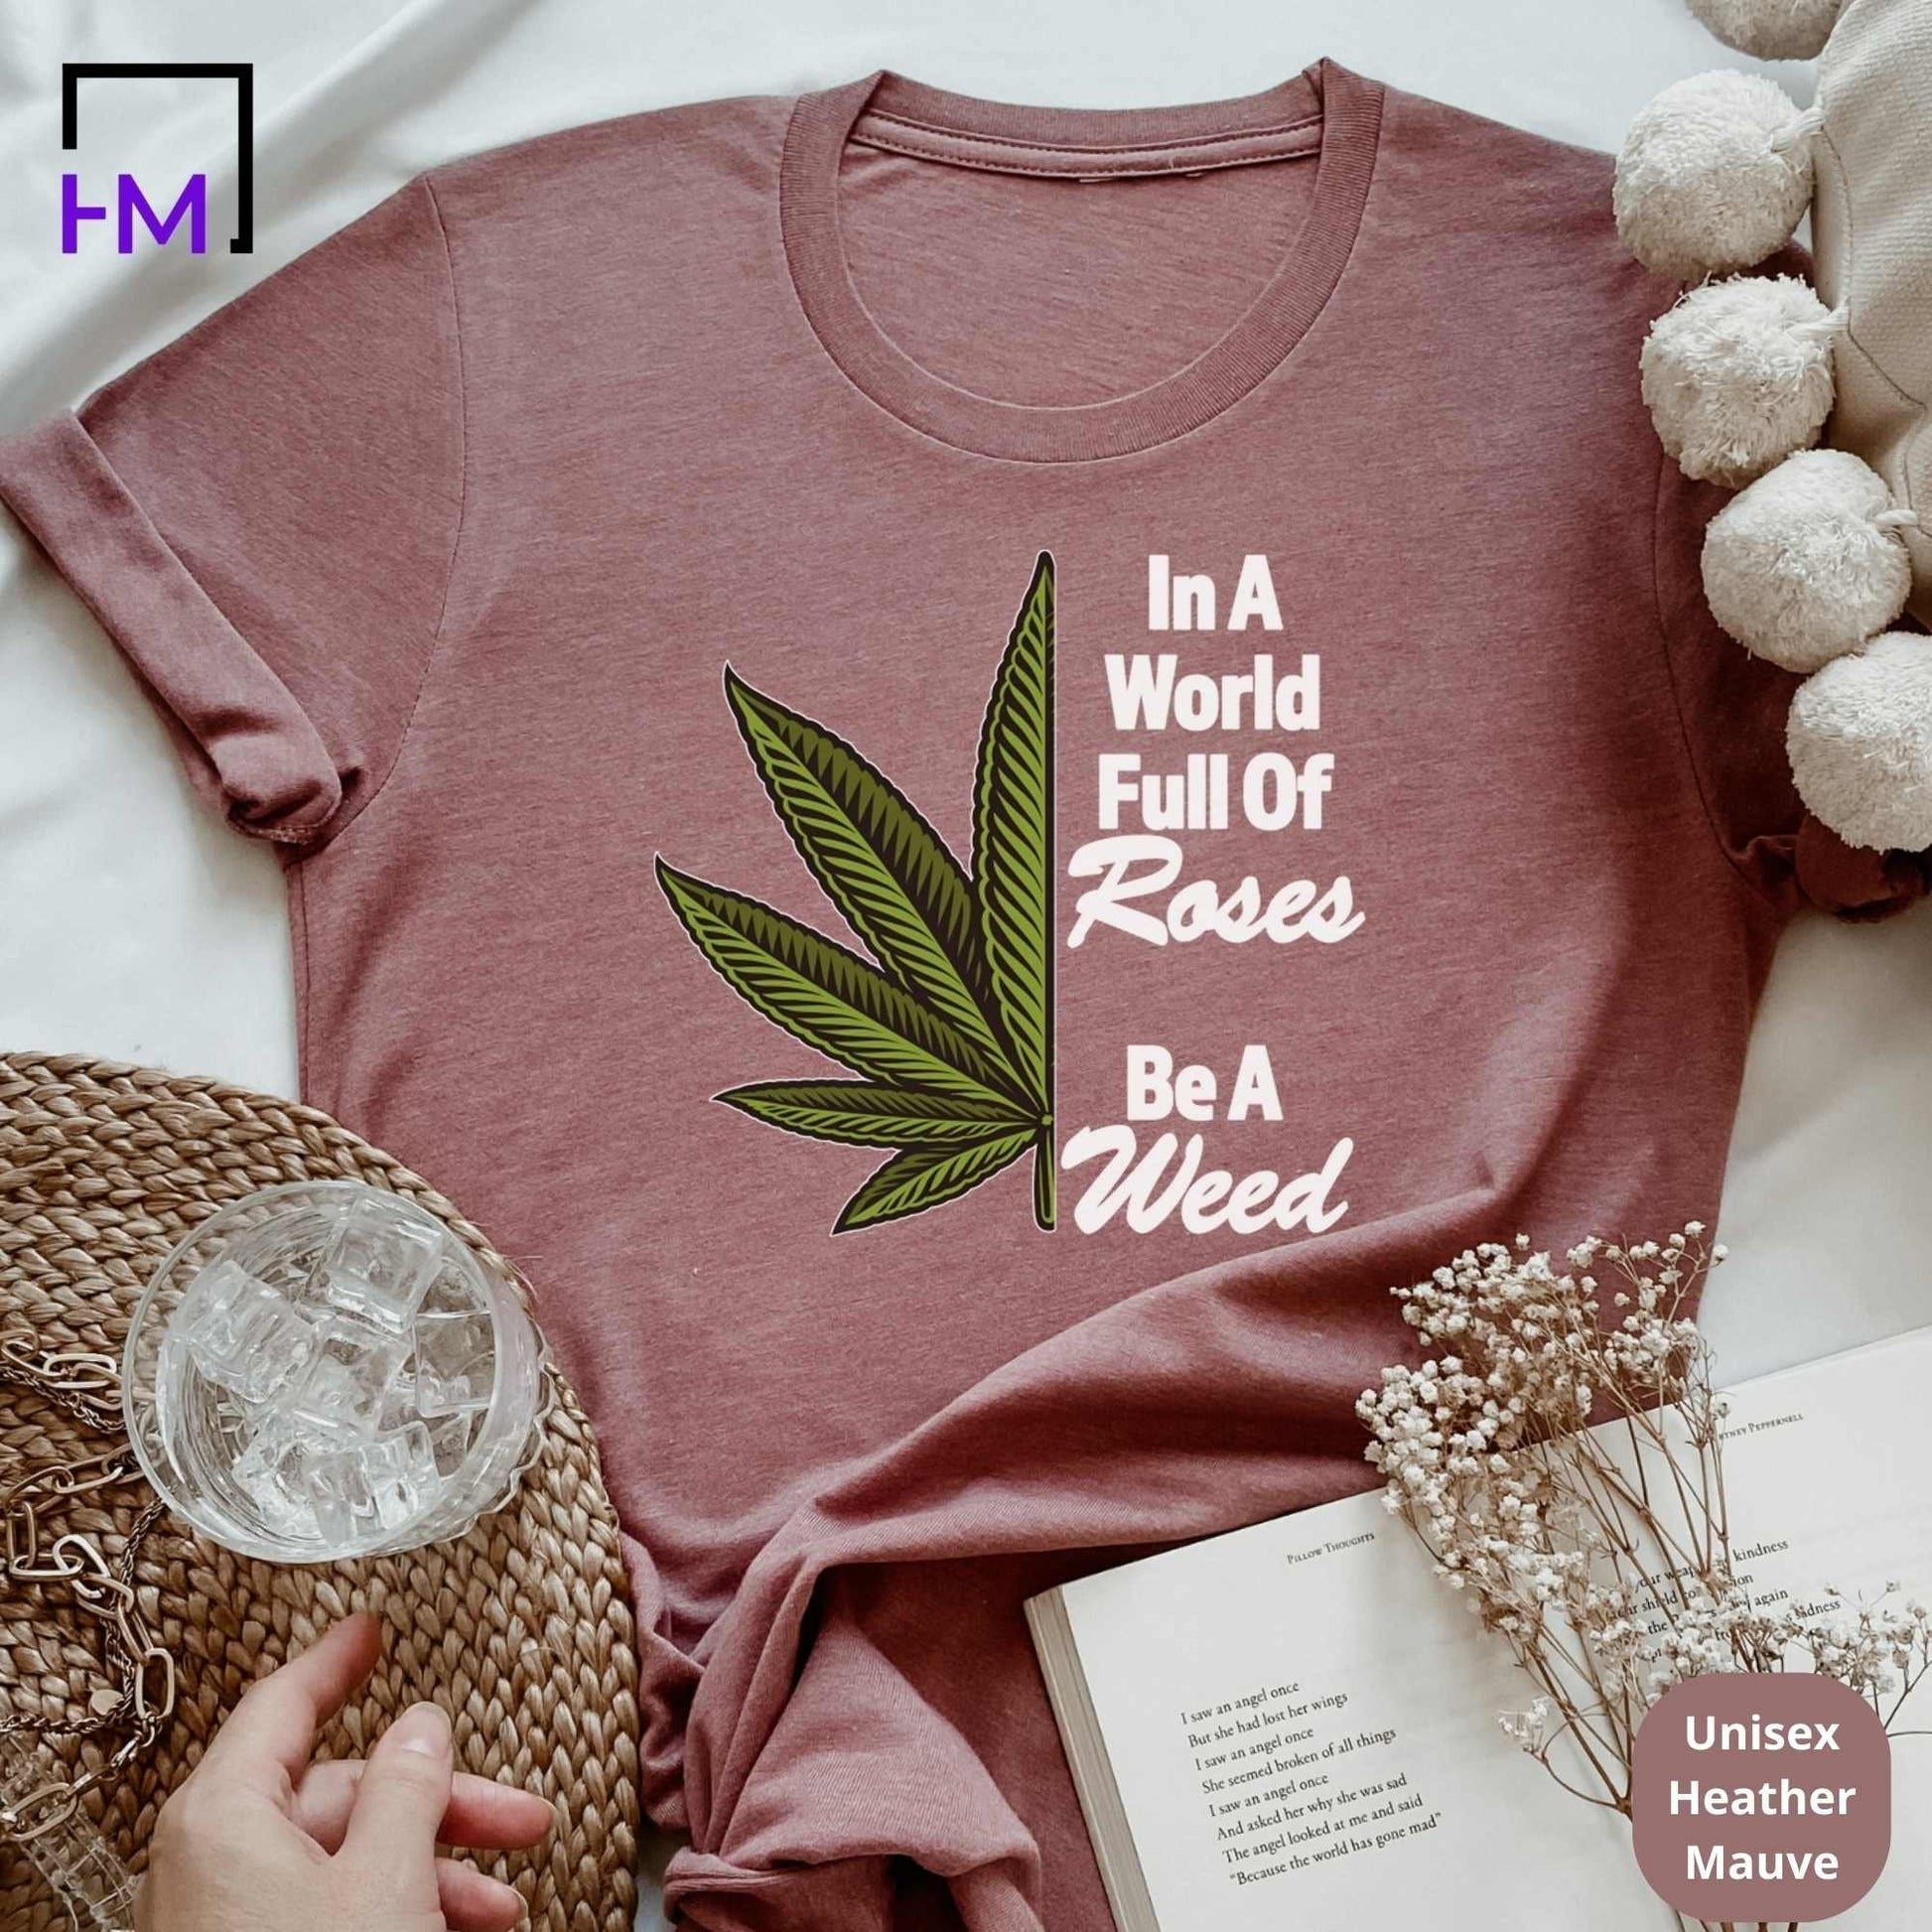 Stoner Gifts, Hippie Clothes, Weed Gifts, 420 Gift Bluntness Stoner Girl  Shirt, Stoner Gift for Him, Stoner Gift for Her, Marijuana T shirts